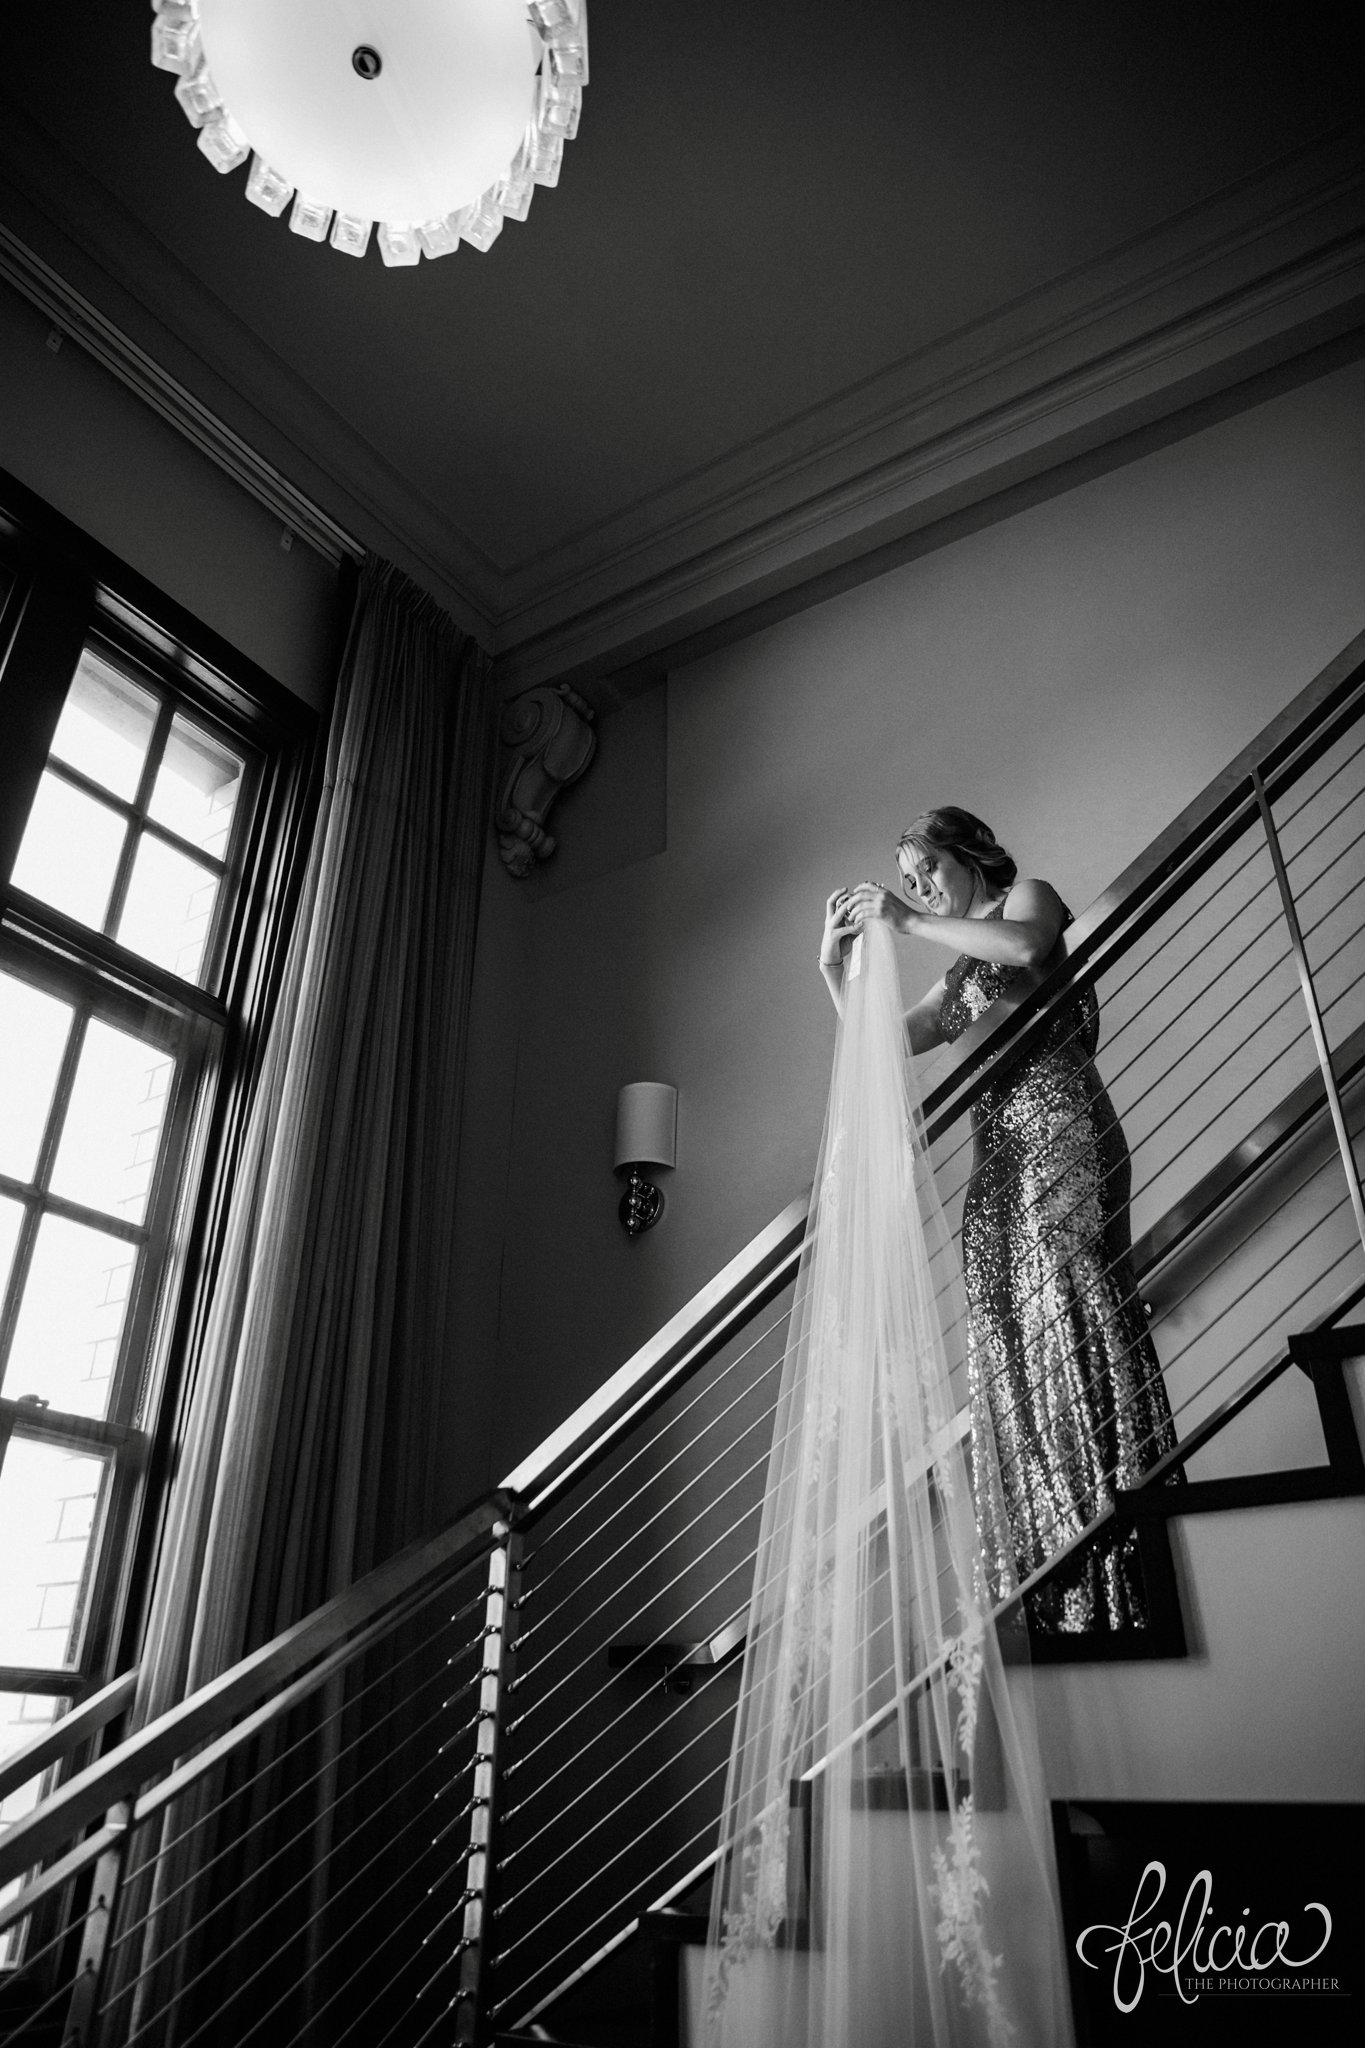 images by feliciathephotographer.com | wedding photographer | downtown kansas city | getting ready | bella bridesmaid | sequins | black and white | staircase | long lace veil | 